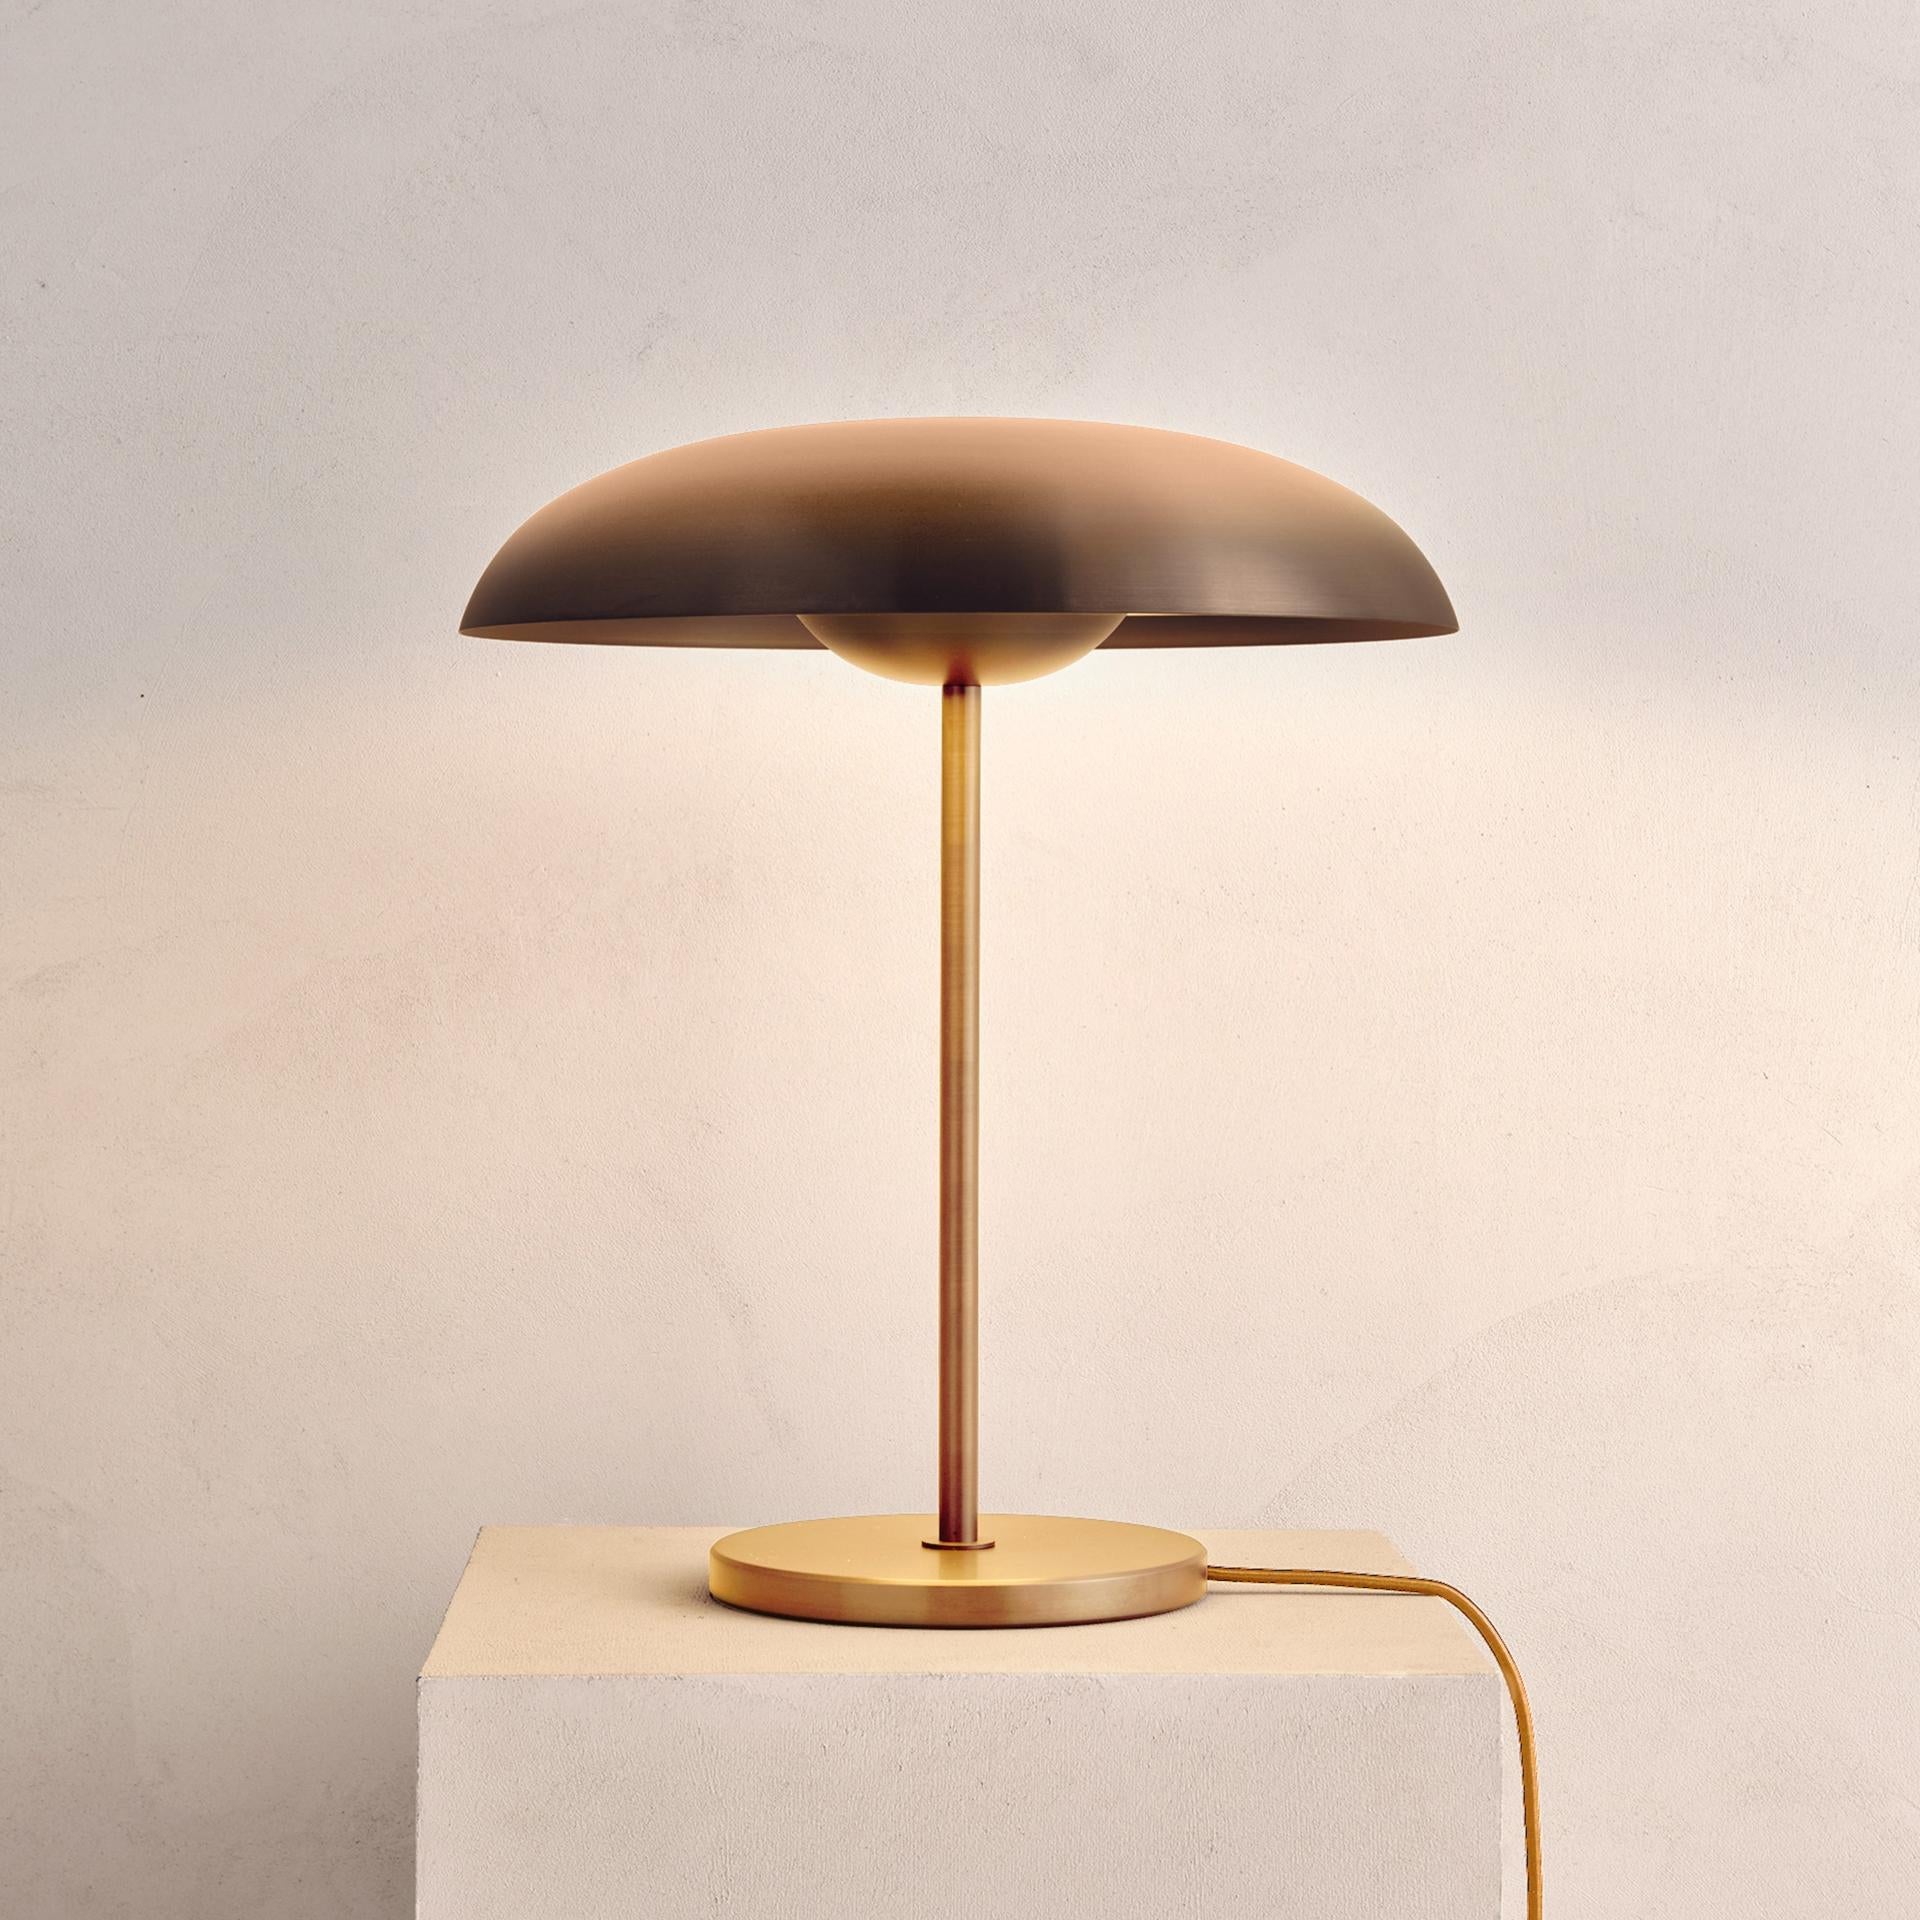 'Cosmic Solstice Ore' Table Lamp, Handmade Bronze Patinated Brass Table Light